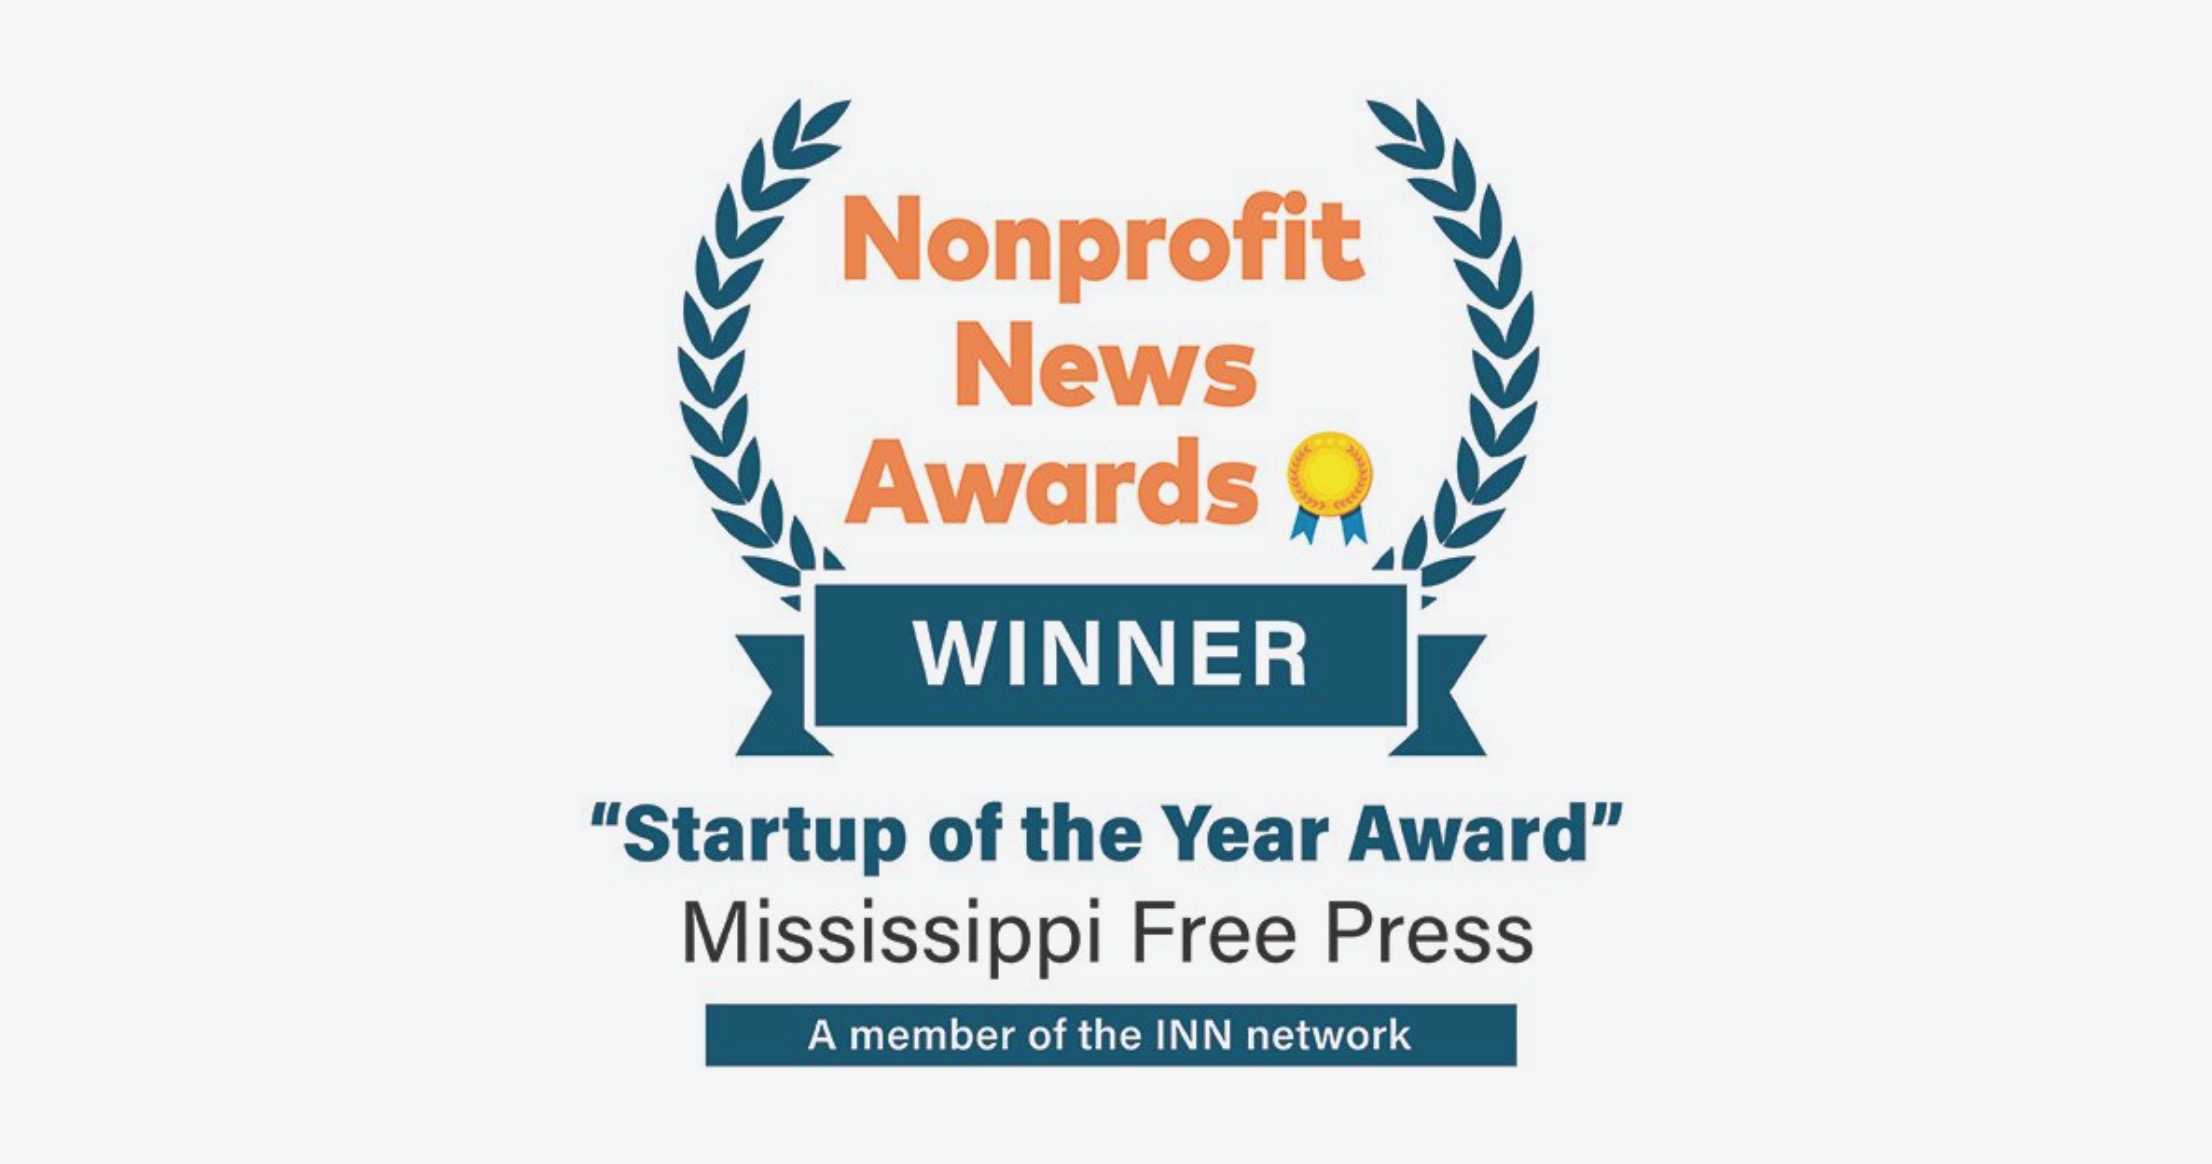 graphic announcing Mississippi Free Press as "Startup of the Year"